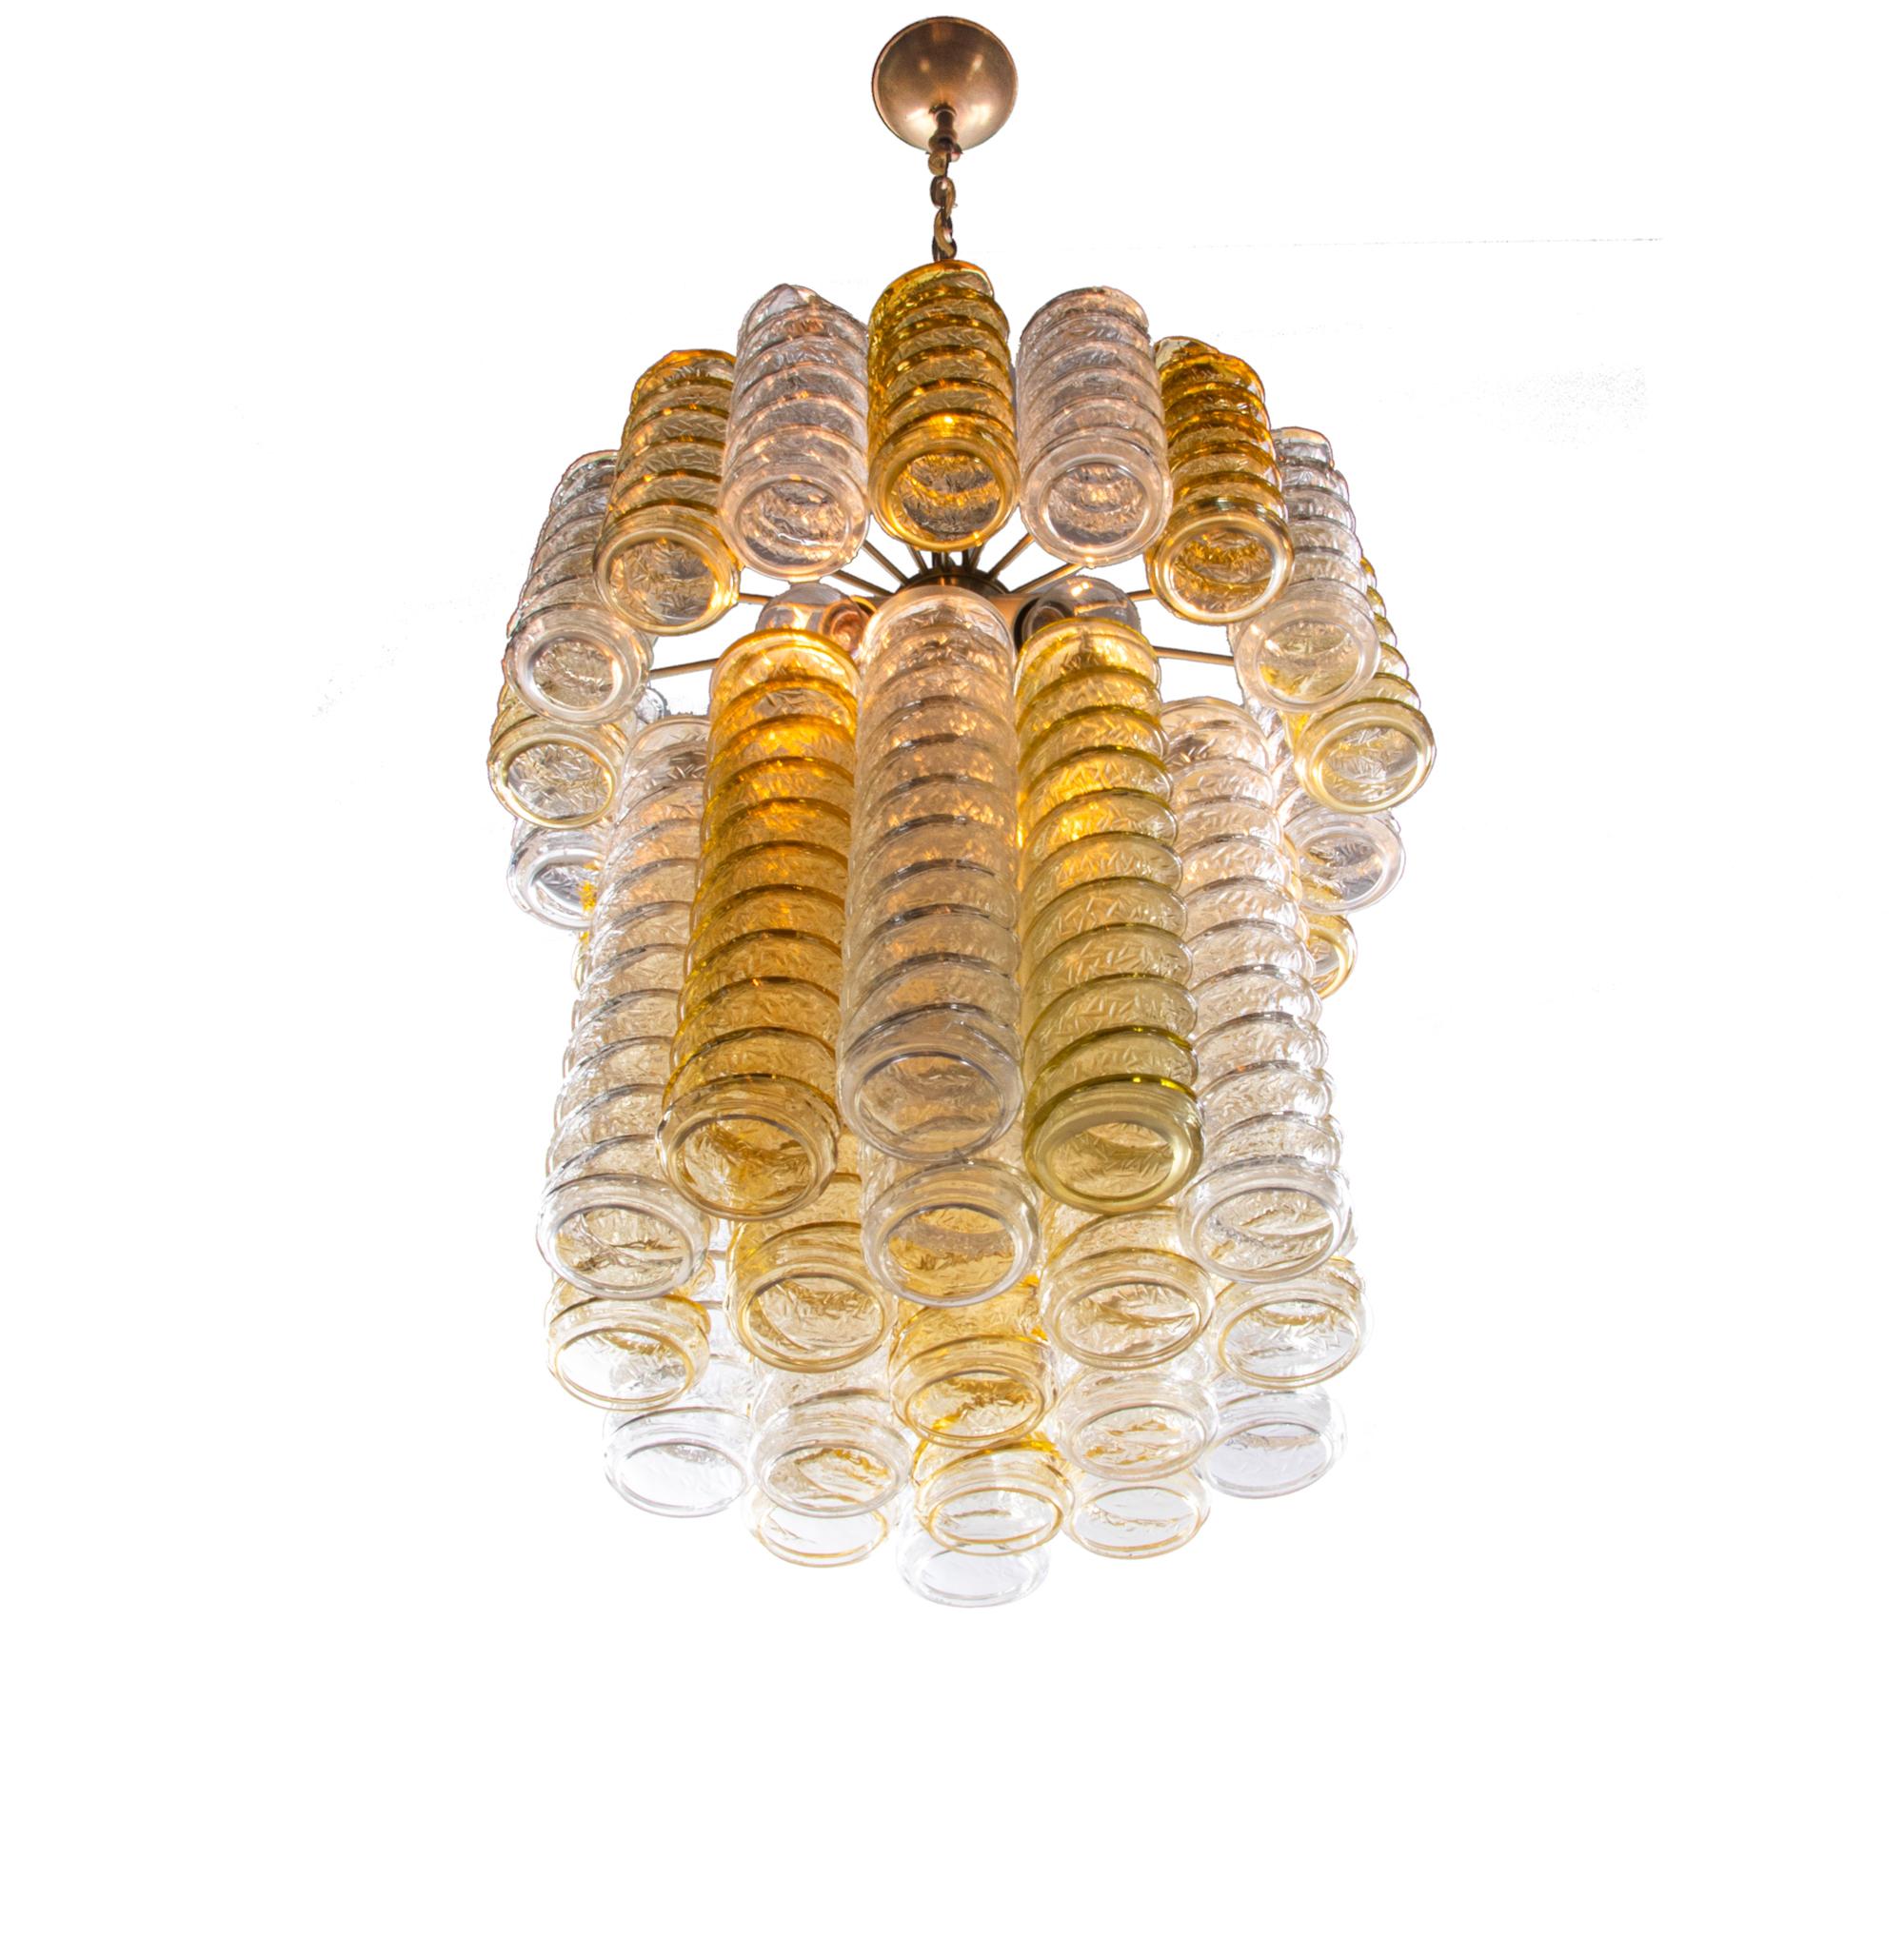 Elegant swirl chandelier designed by Paolo Venini with thirty-seven large, twisted, amber and clear Murano glasses suspended in two stages around a chromed brass frame, which thanks to strong illumination offers a beautiful play of light and colors